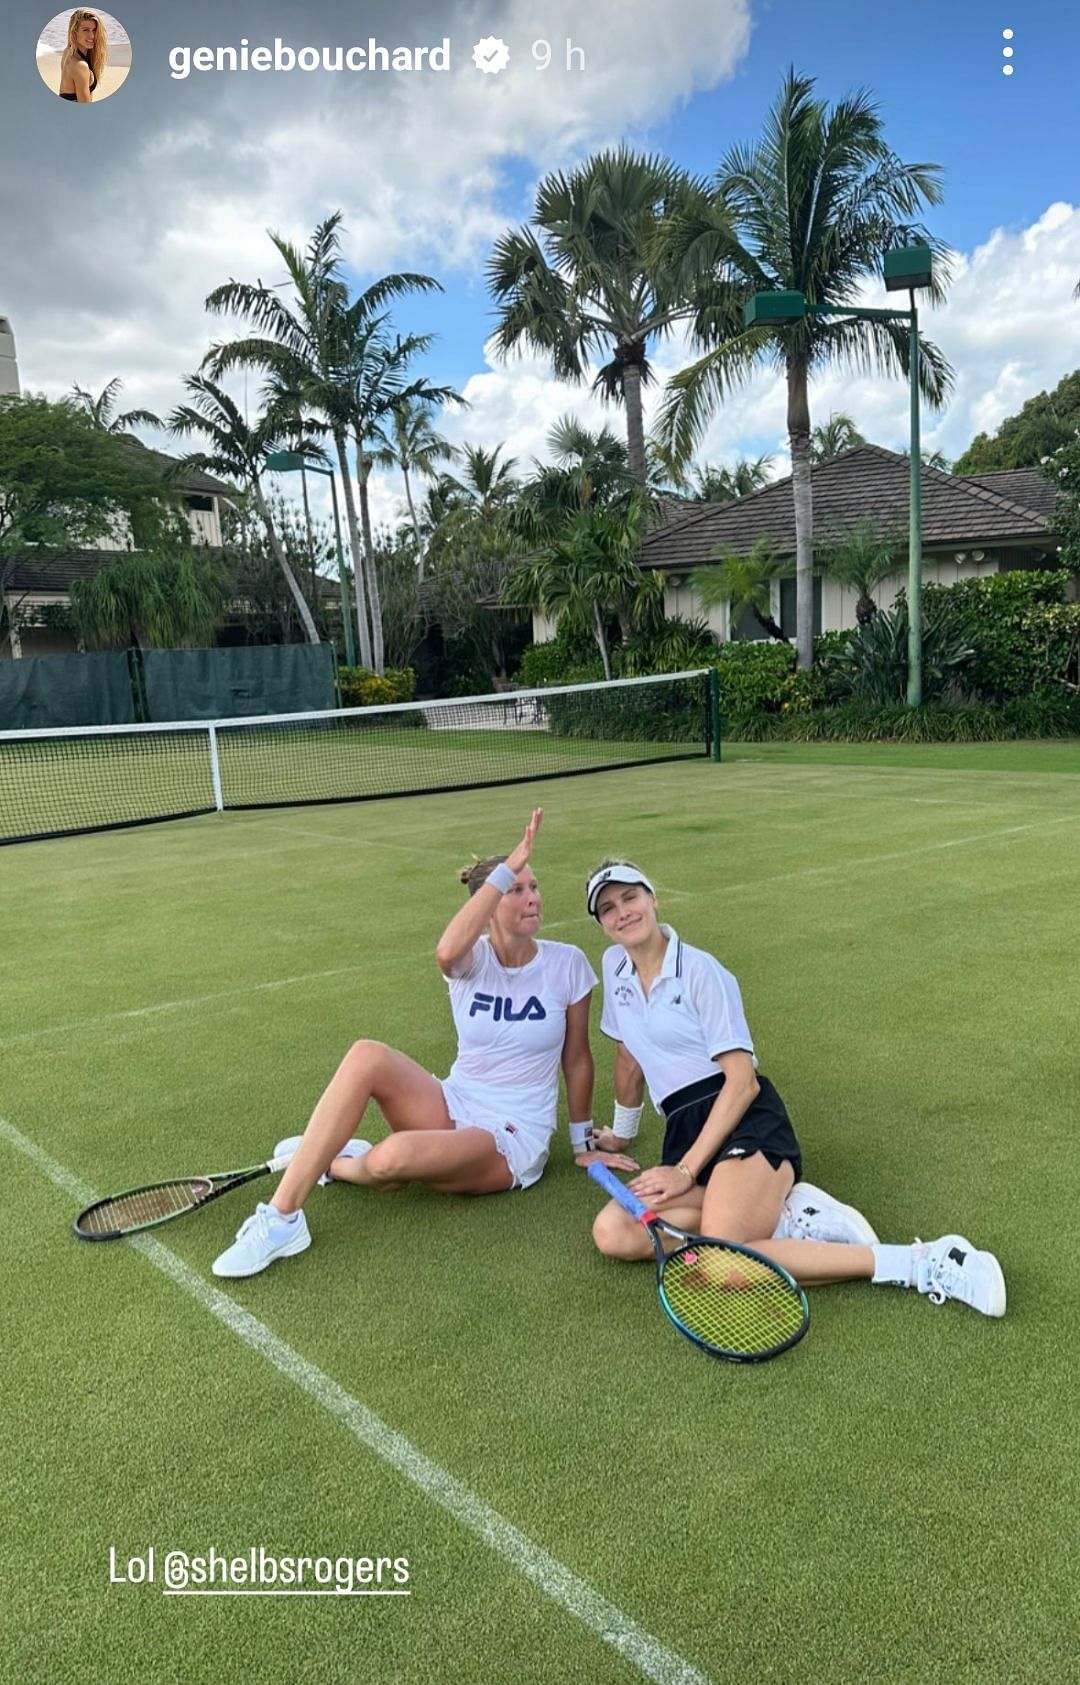 Shelby Rogers joins Eugene Bouchard for a training session on grass